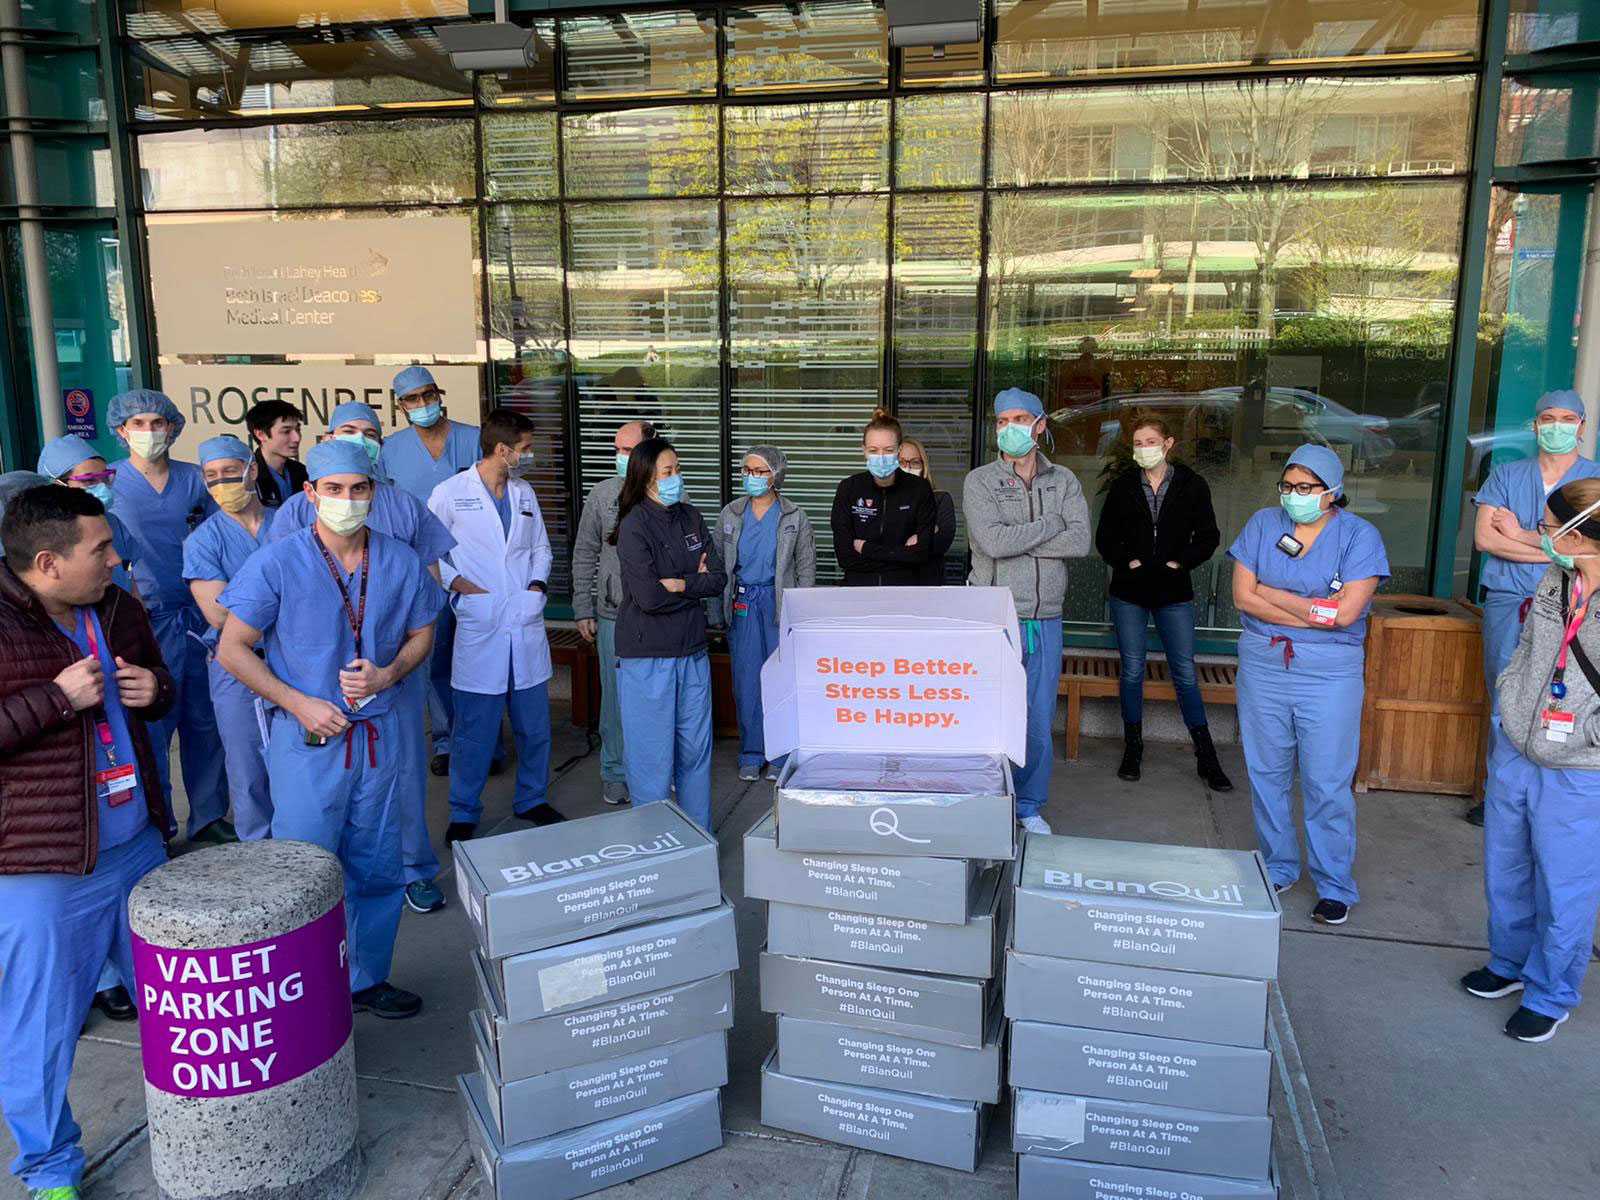 BlanQuil had the pleasure of giving out BlanQuils to Frontline Workers at Beth Israel Deaconess Medical Center on Thursday. We appreciate everything they are doing to help save lives. We want to thank all First Responders and everyone who risks their lives to help others in need. You all deserve a good night's sleep.